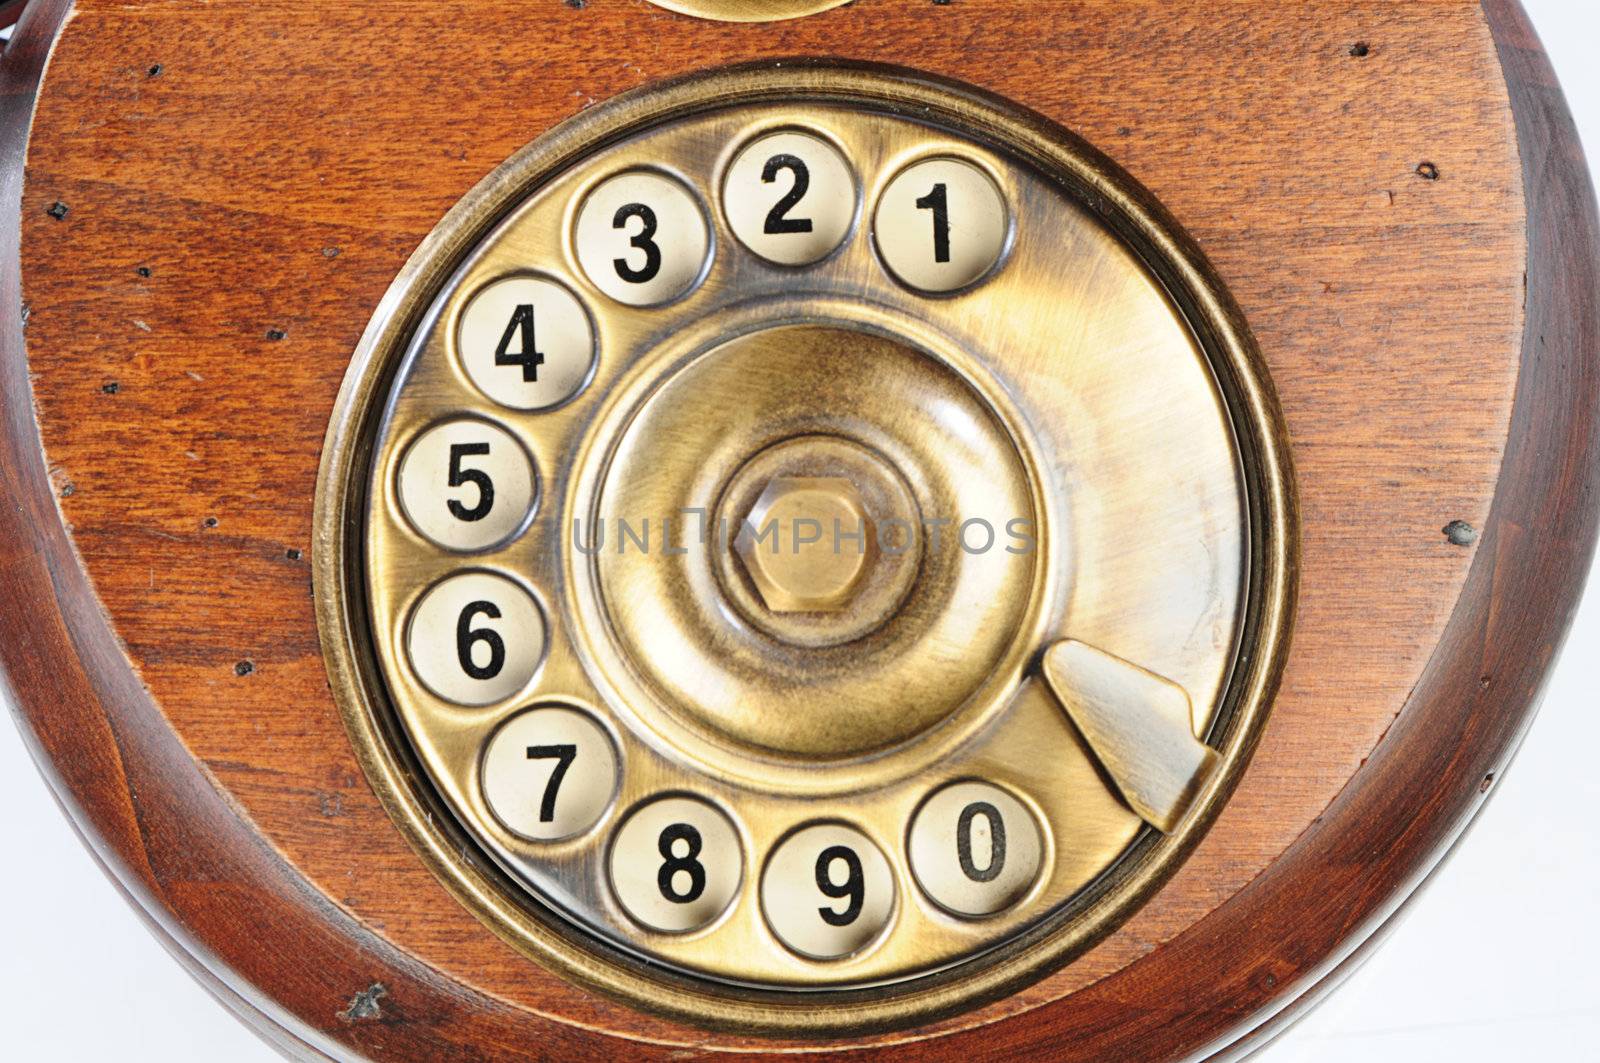 old-fashioned phone dial on wood antique phone